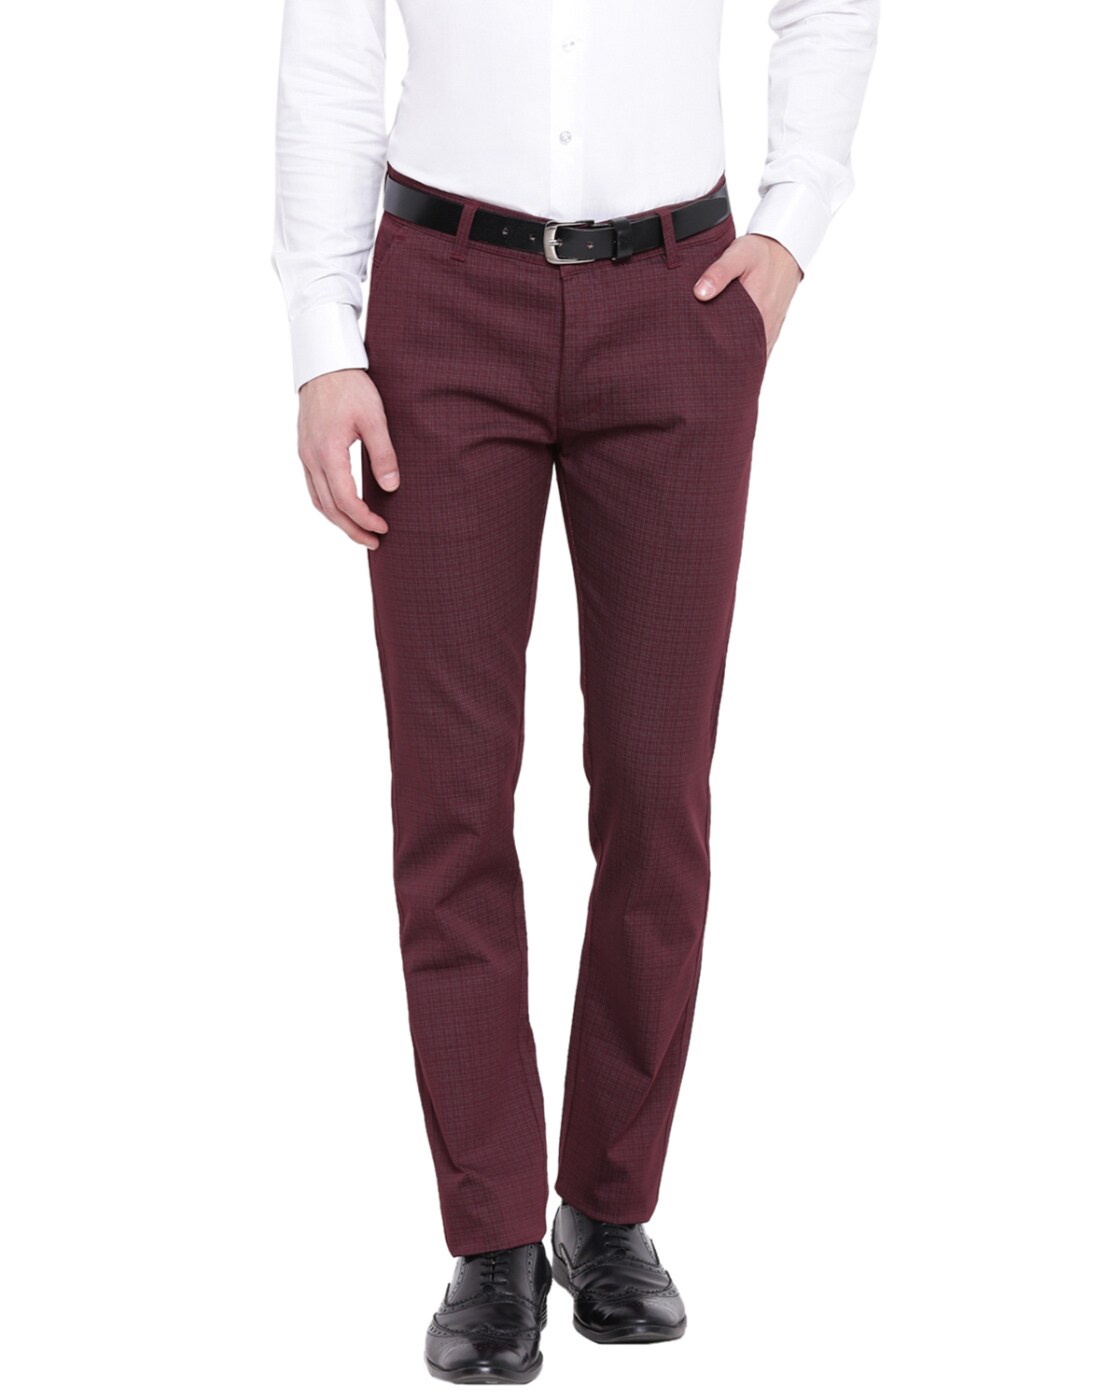 Buy R DUDE Maroon Cotton Pants for Men 36 Inches at Amazonin